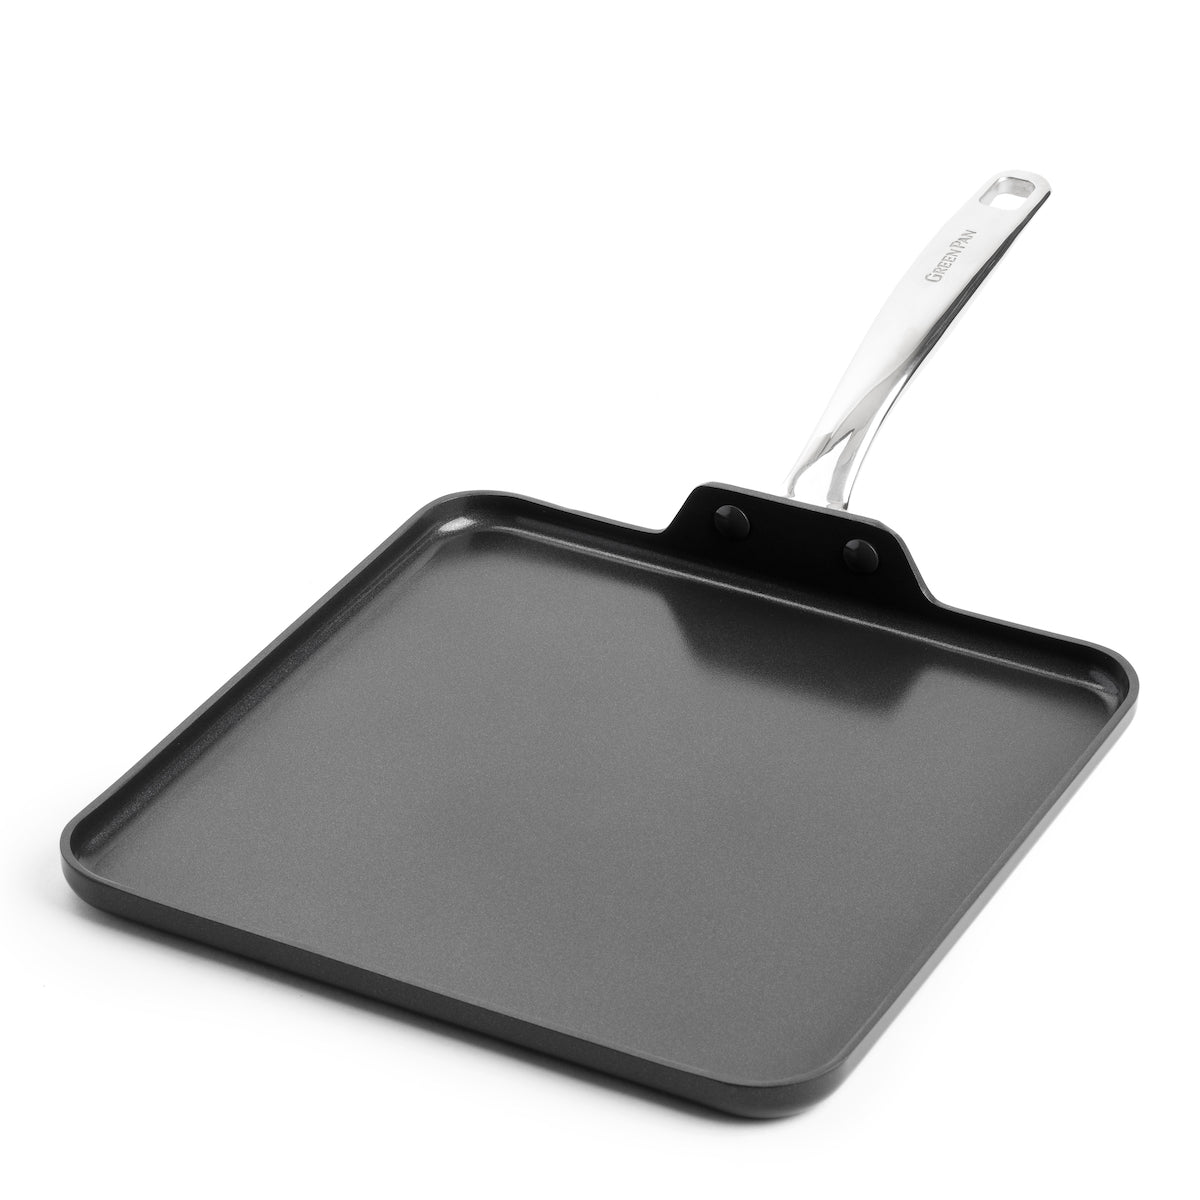 Not A Square Pan 12 inch Classic Nonstick Square Fry Pan, Gray